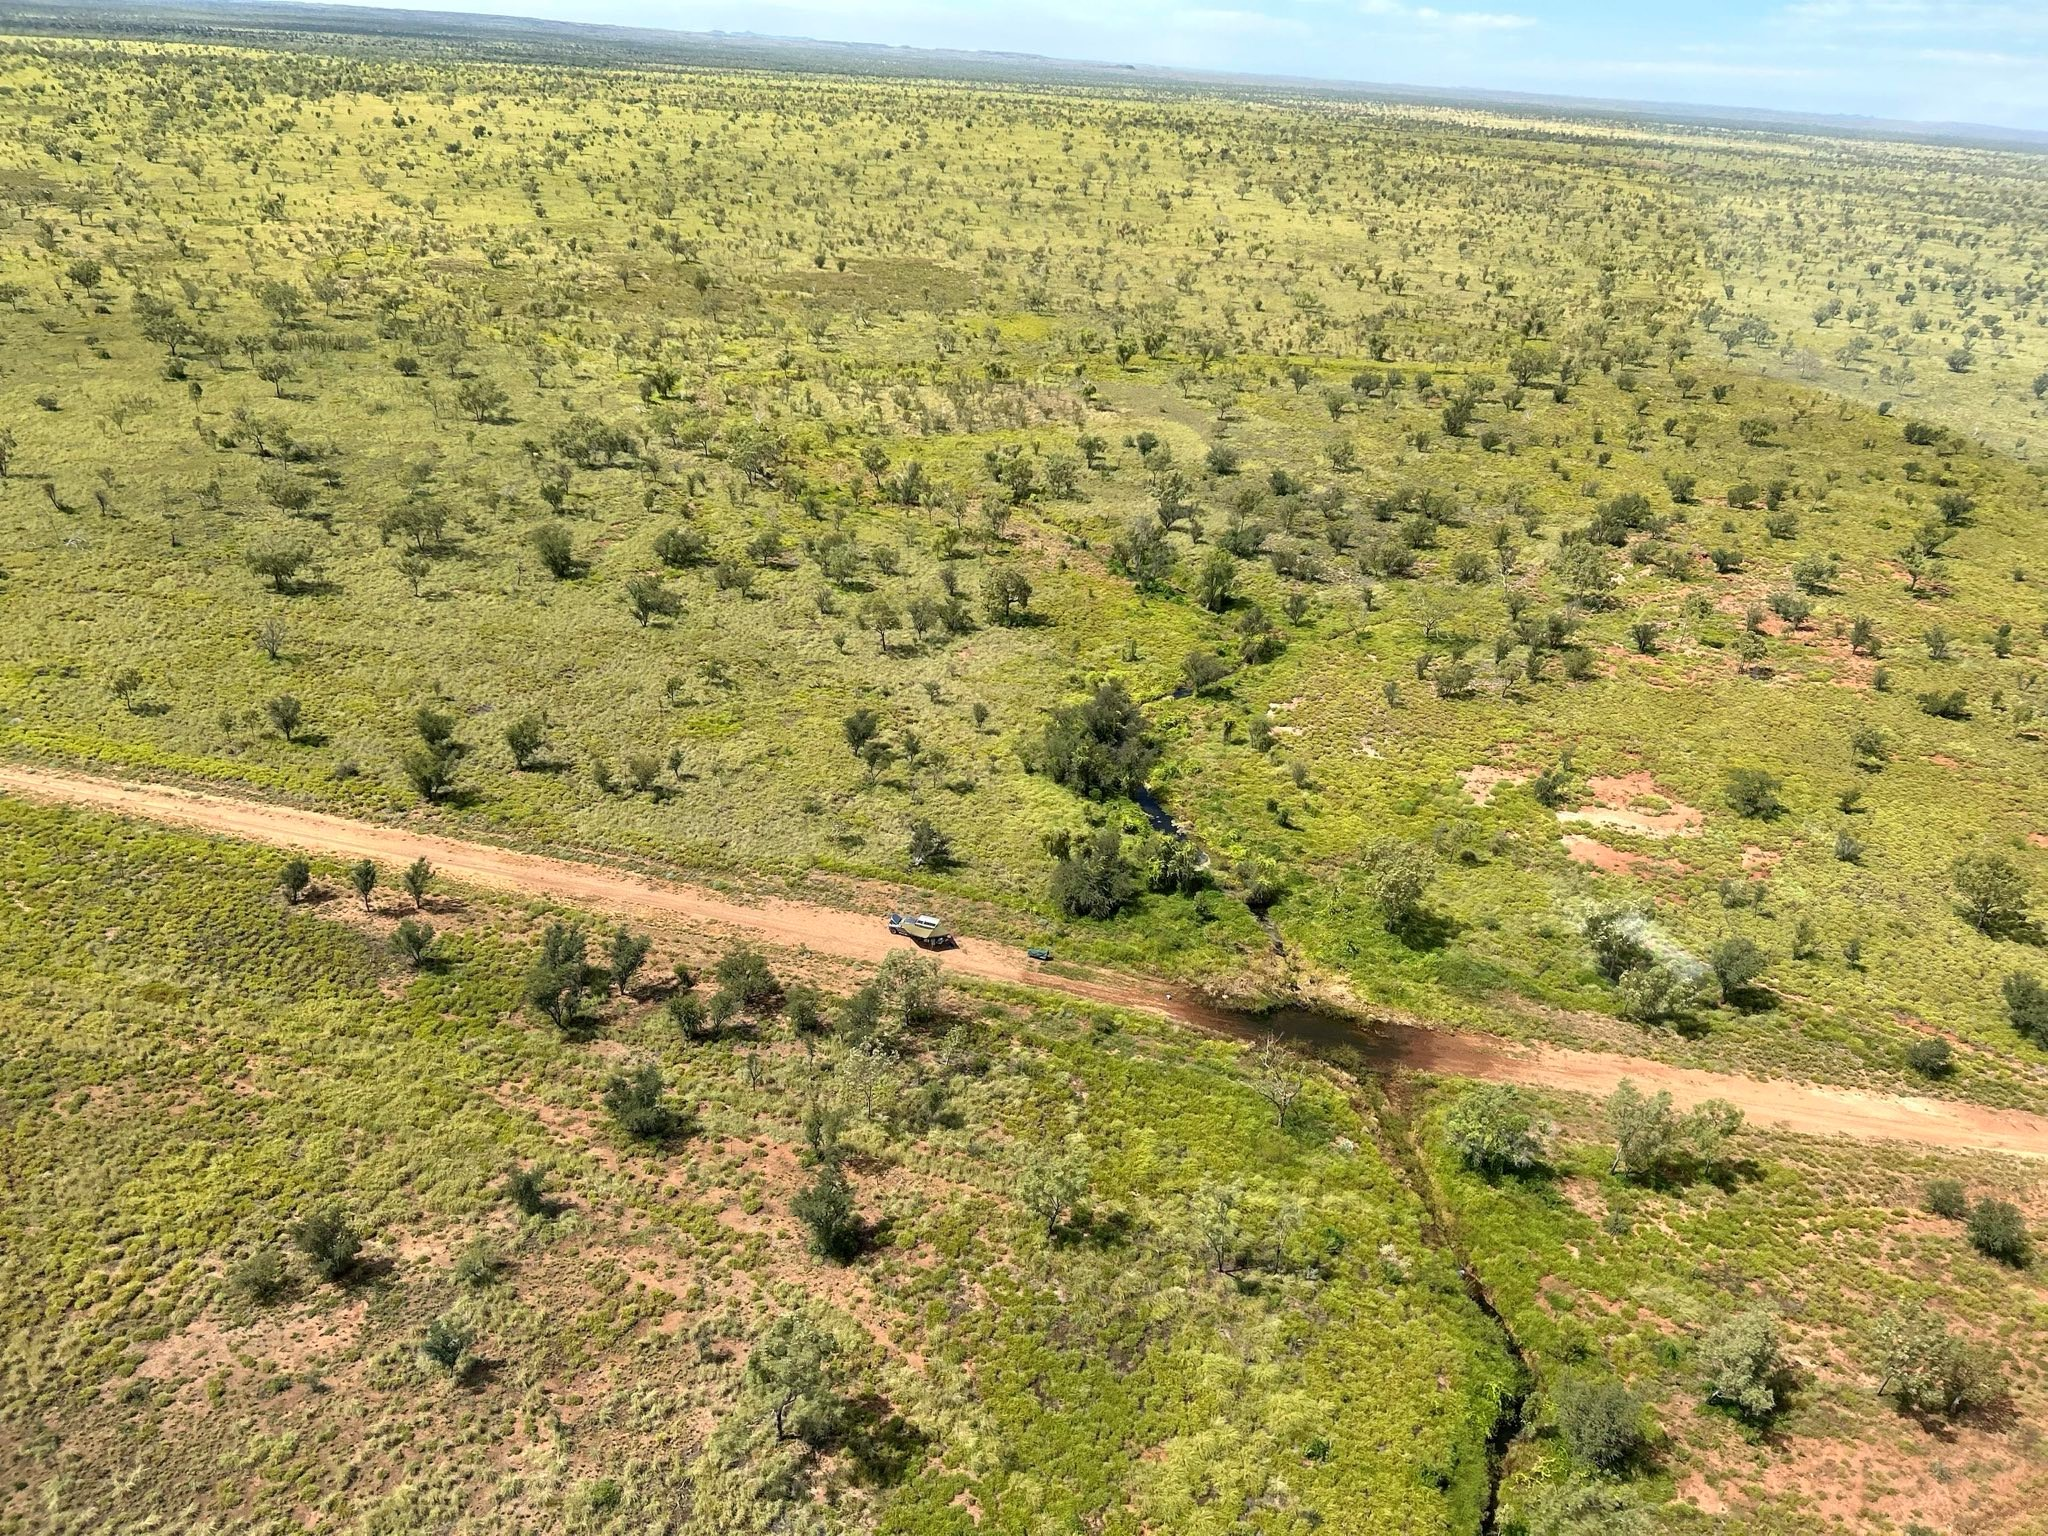 Tourist rescued after becoming stranded in remote Kimberley outback